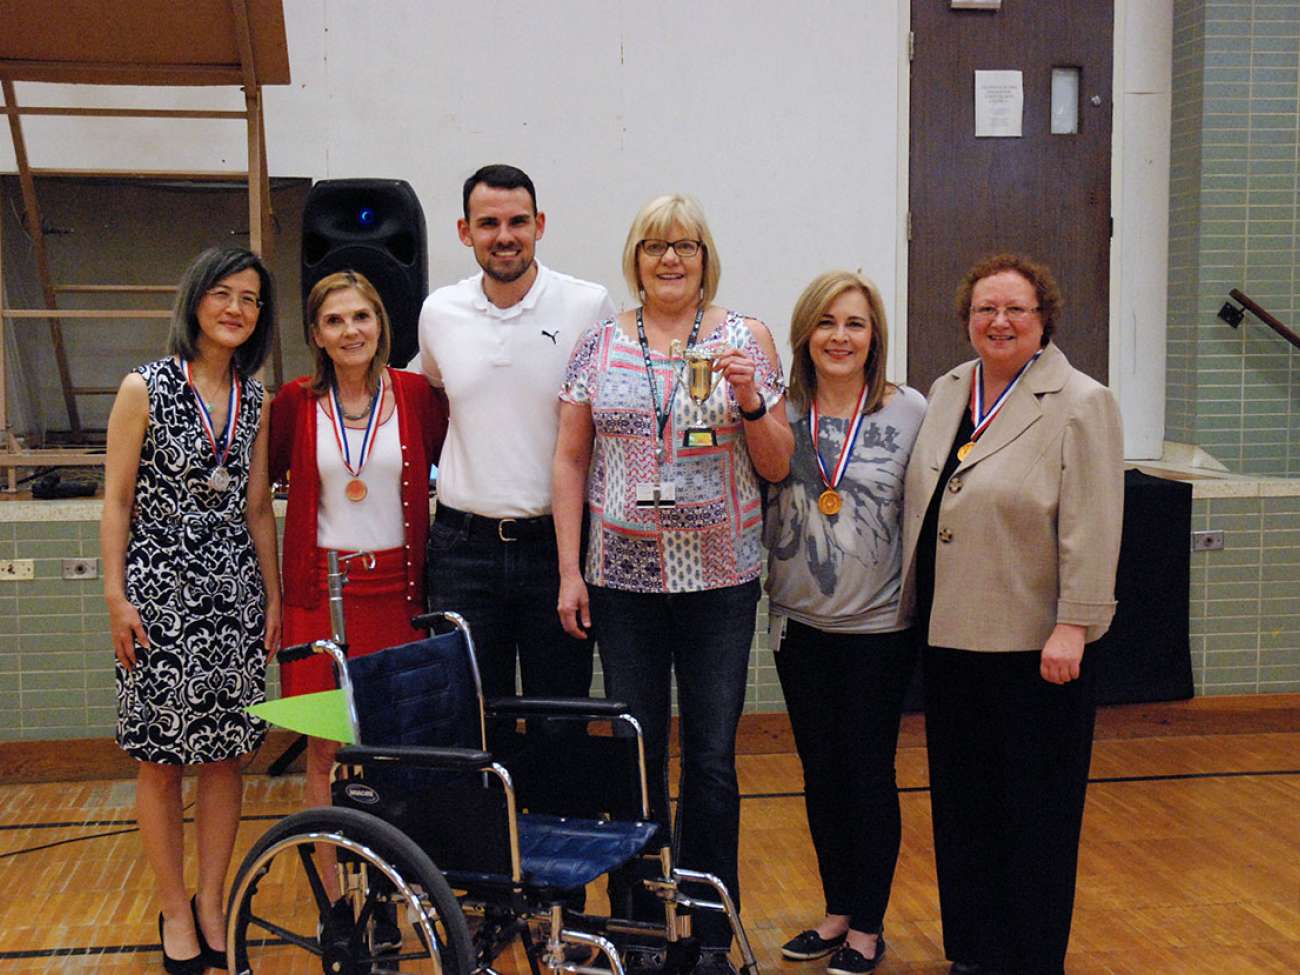 In the end, patients and families all come away the winners through a better fleet of wheelchairs at GRH.